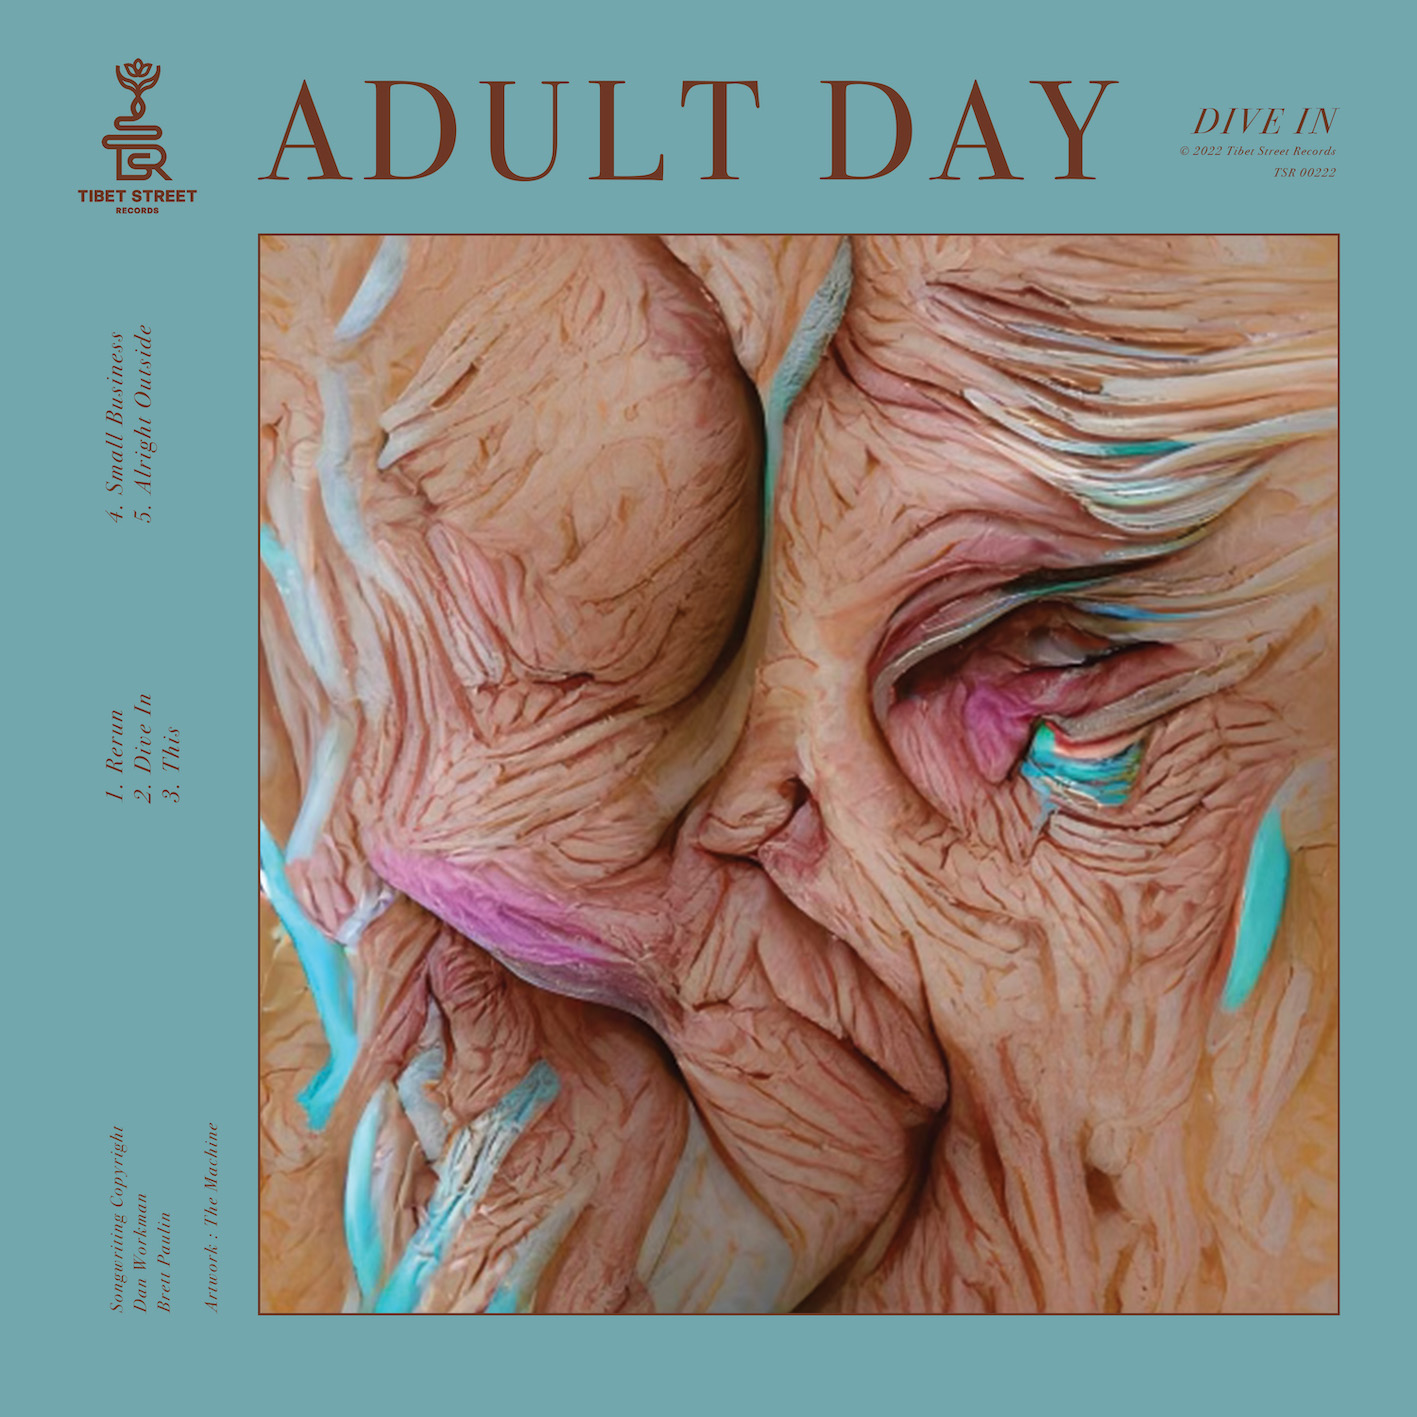 Adult Day--Dive In cover art